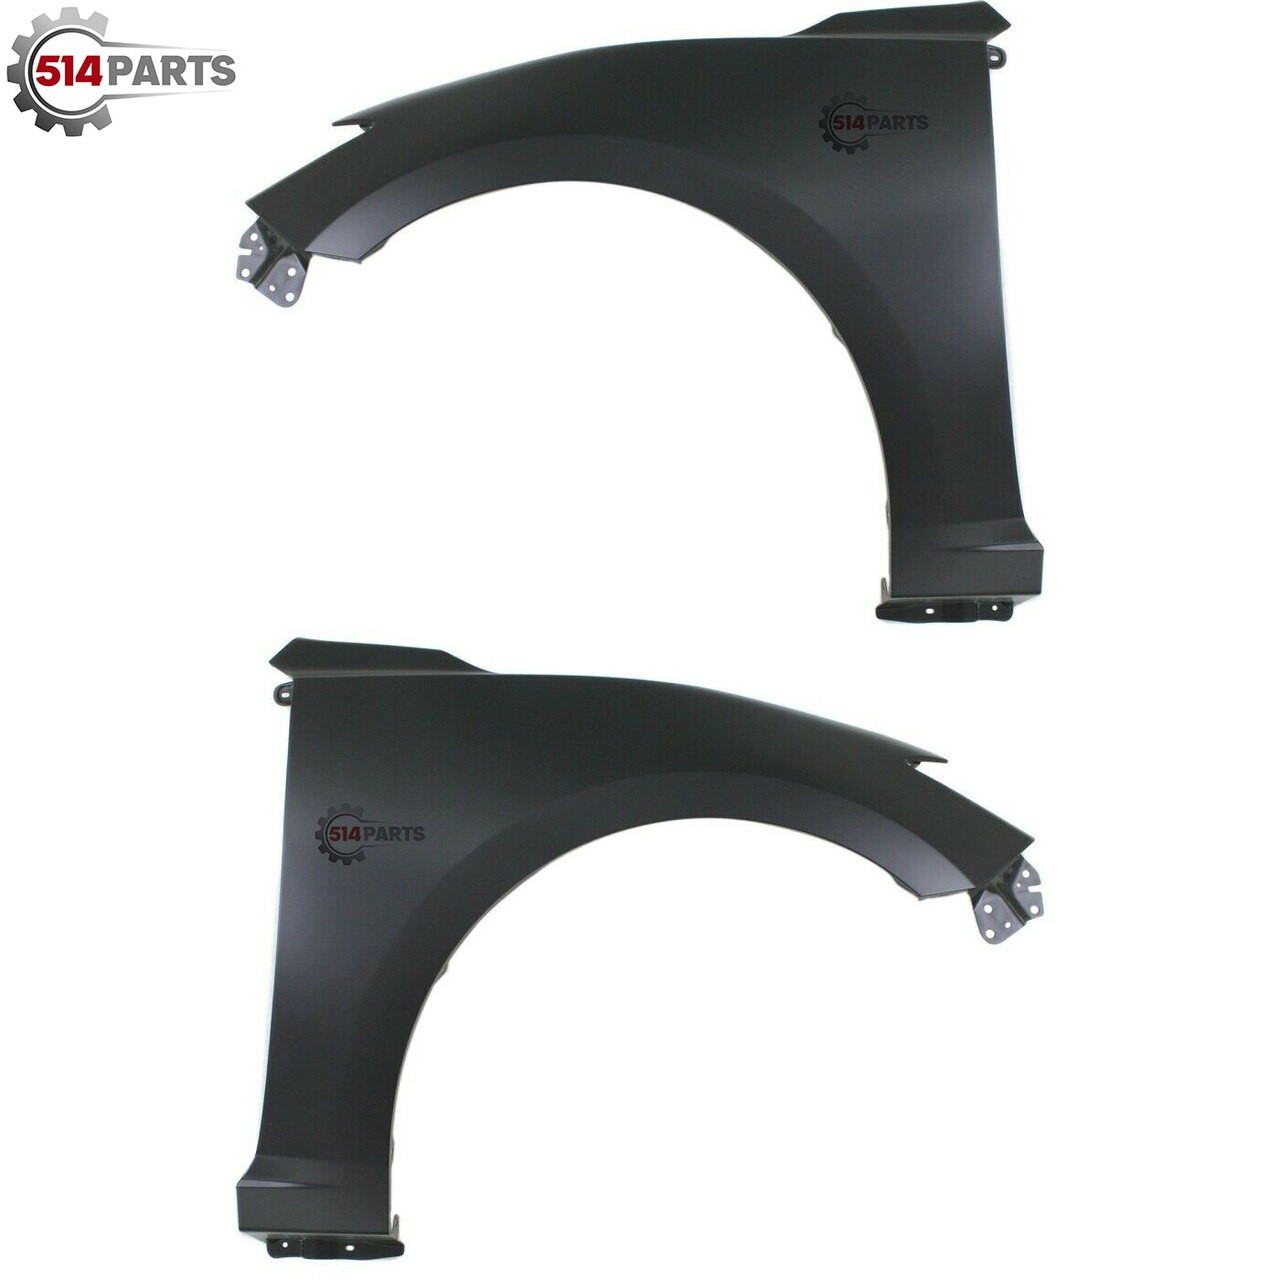 2014 - 2018 MAZDA 3 and MAZDA 3 SPORT(CANADA) FRONT FENDERS - AILES AVANT